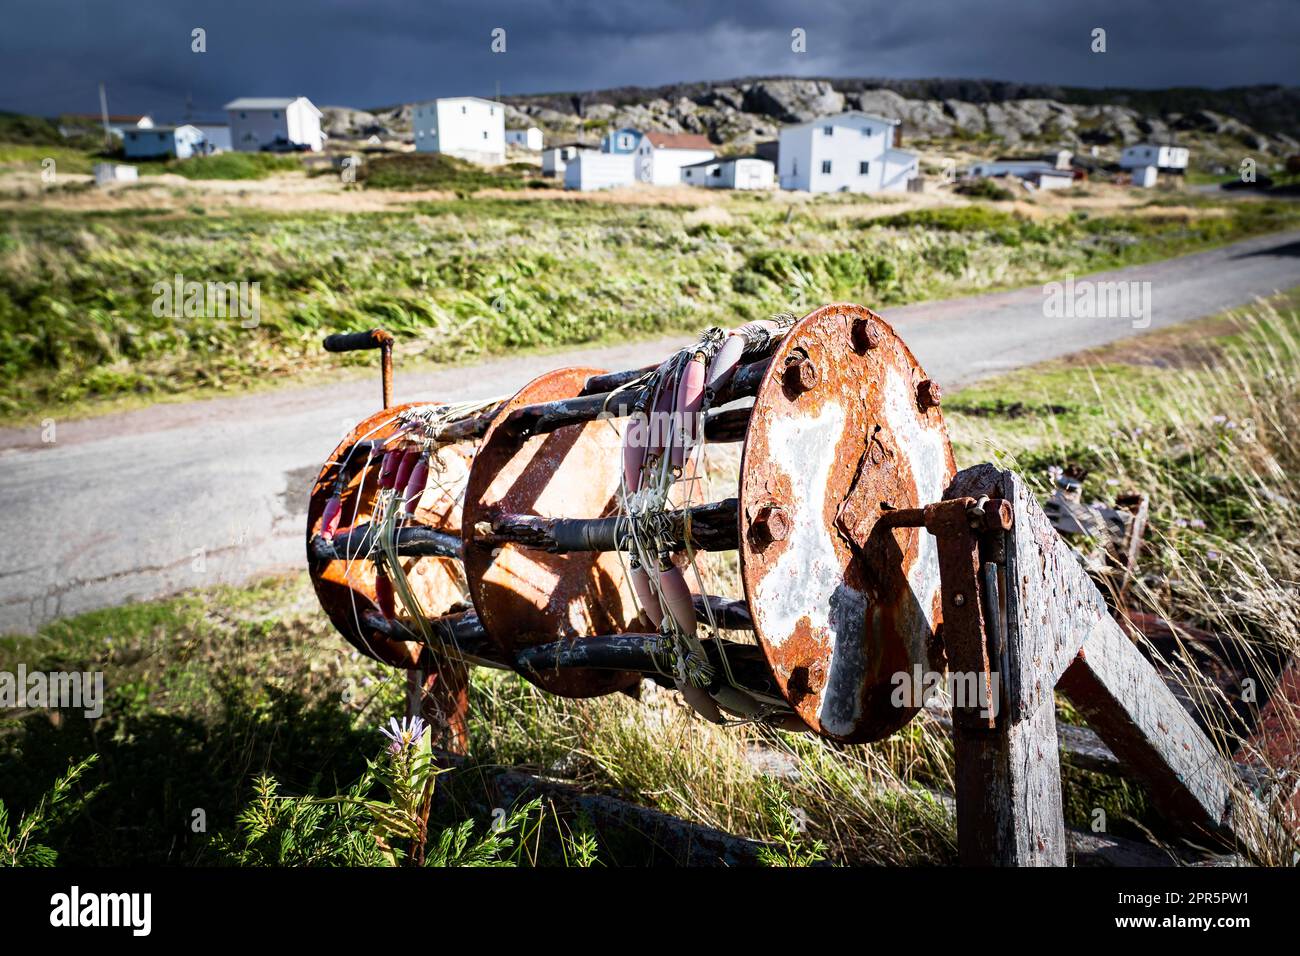 Rustic hand reel from a commercial fishing boat lying in tall grass overlooking small wooden homes at Keels Newfoundland Canada along the Discovery Tr Stock Photo